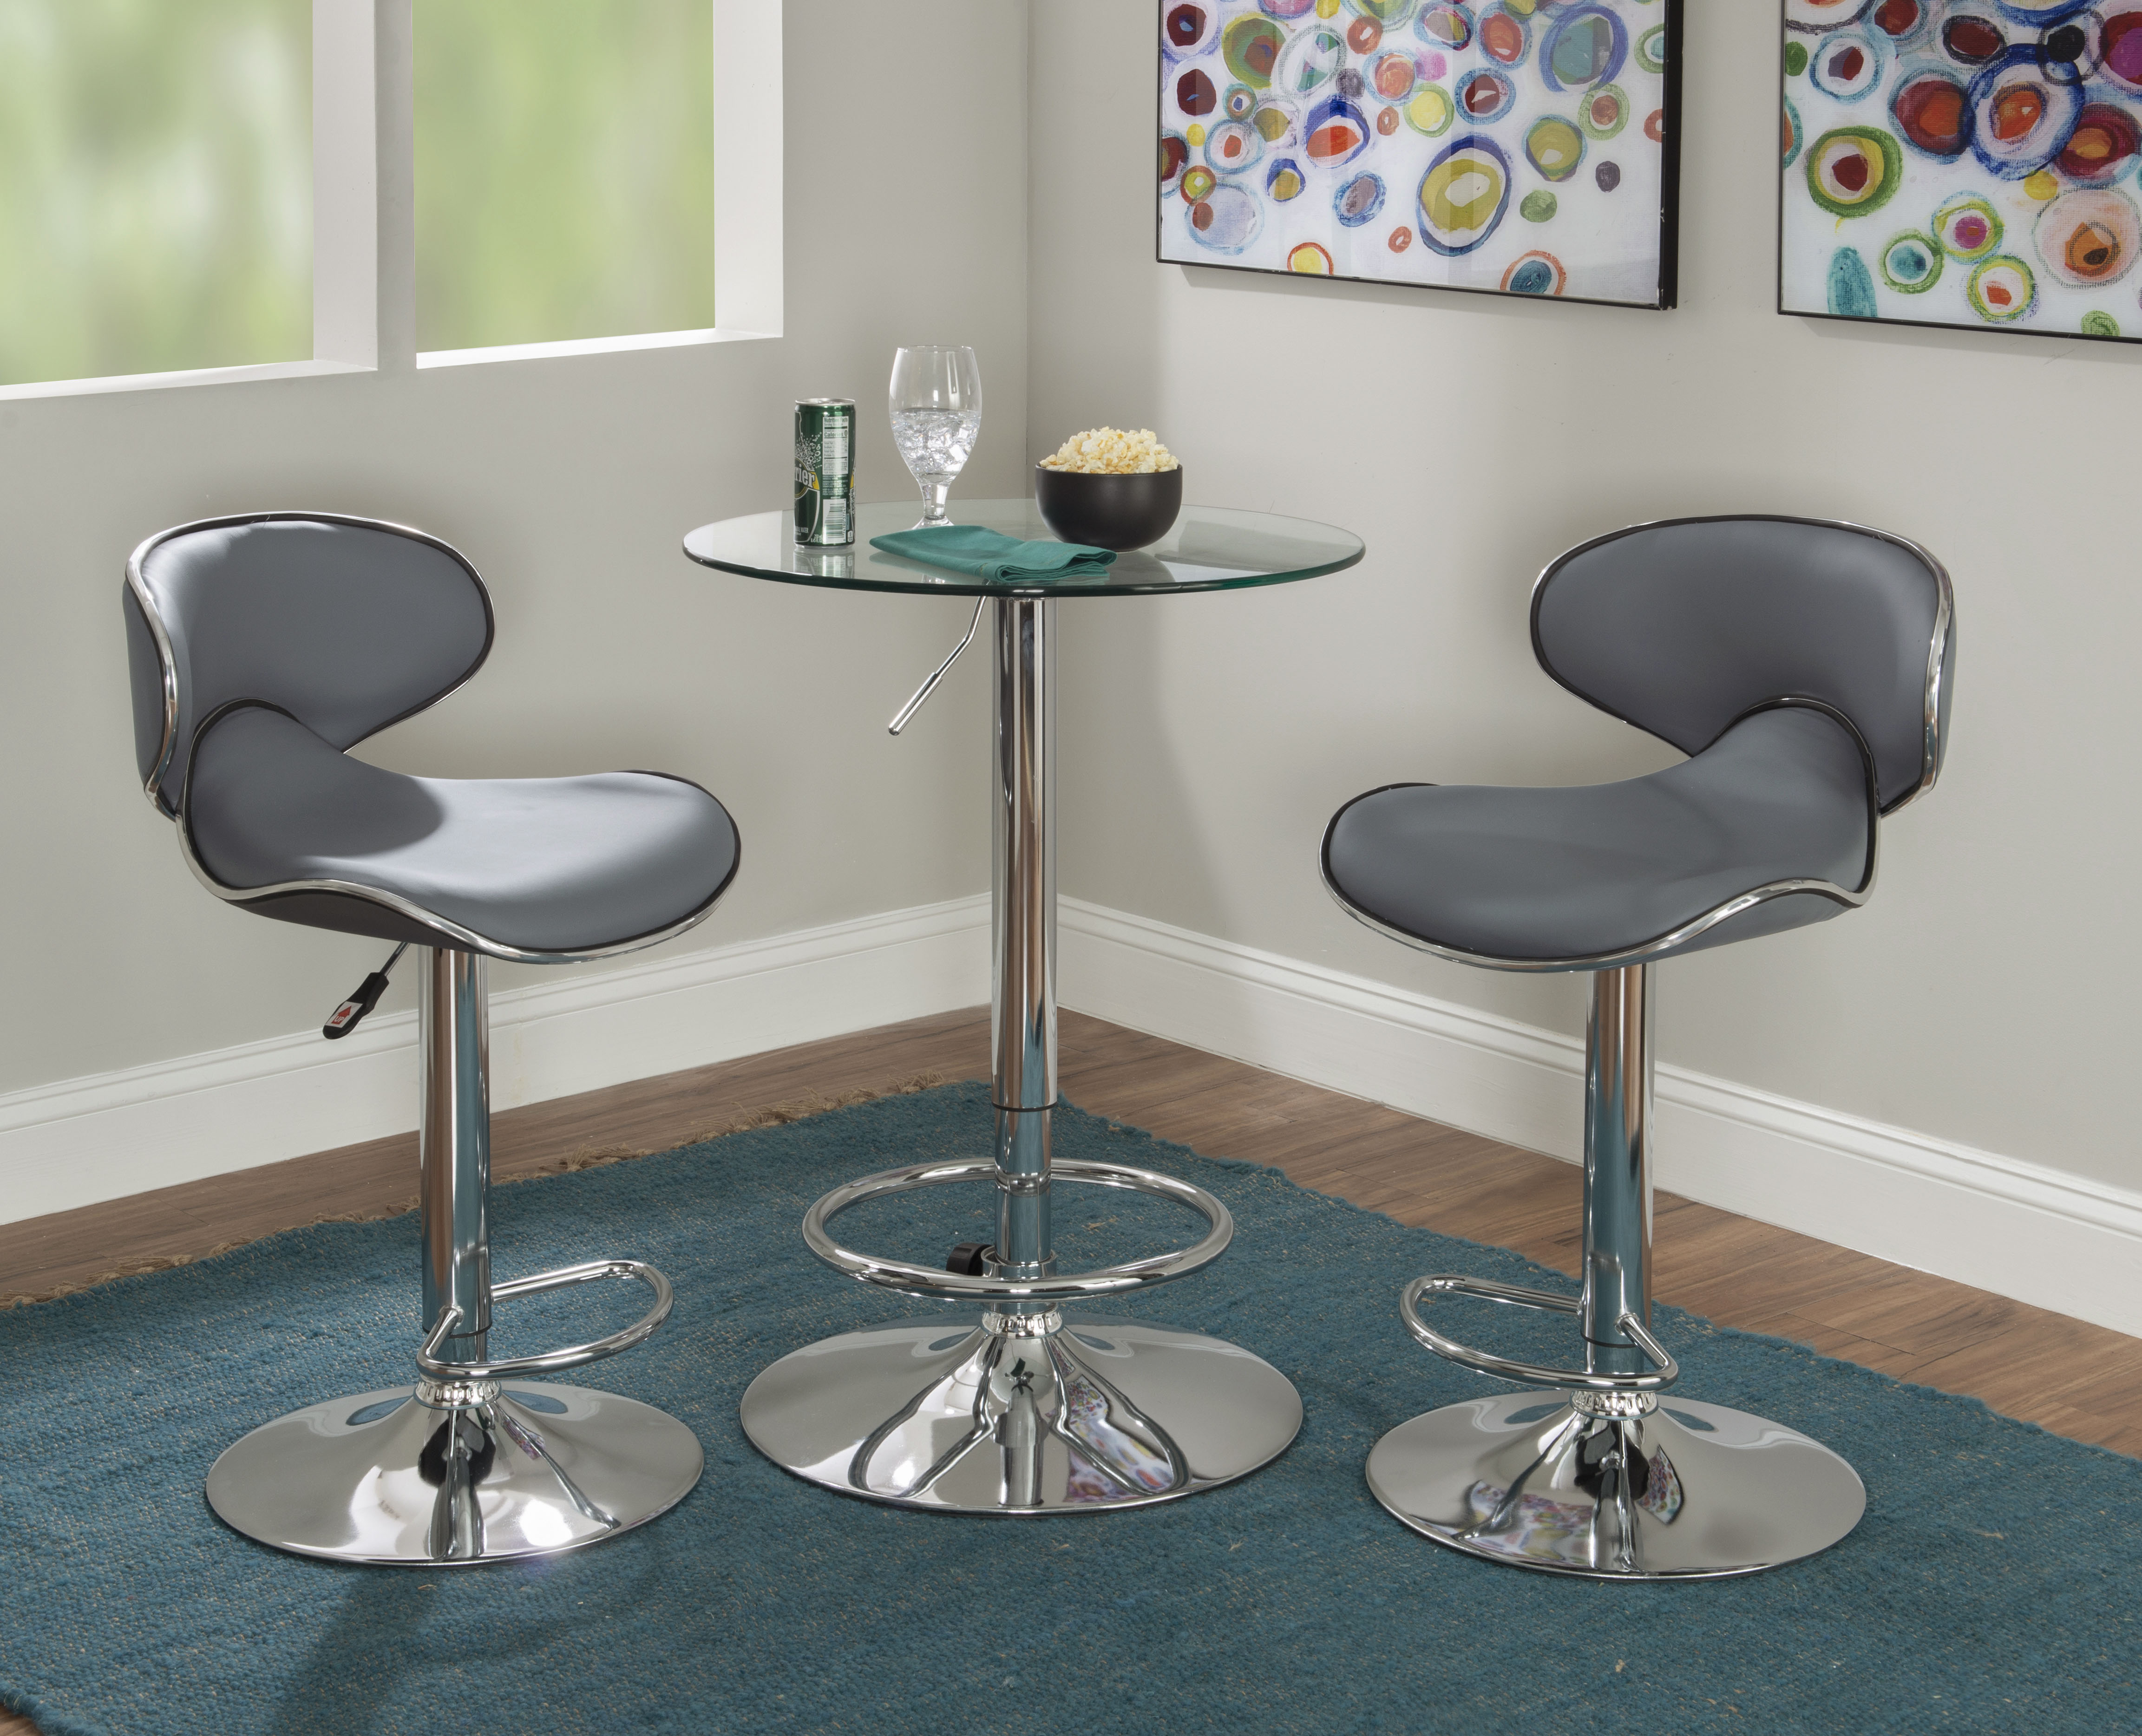 Powell Beldon 24-32" Indoor Adjustable Metal Bar Stool with Swivel, Gray Faux Leather - image 3 of 10